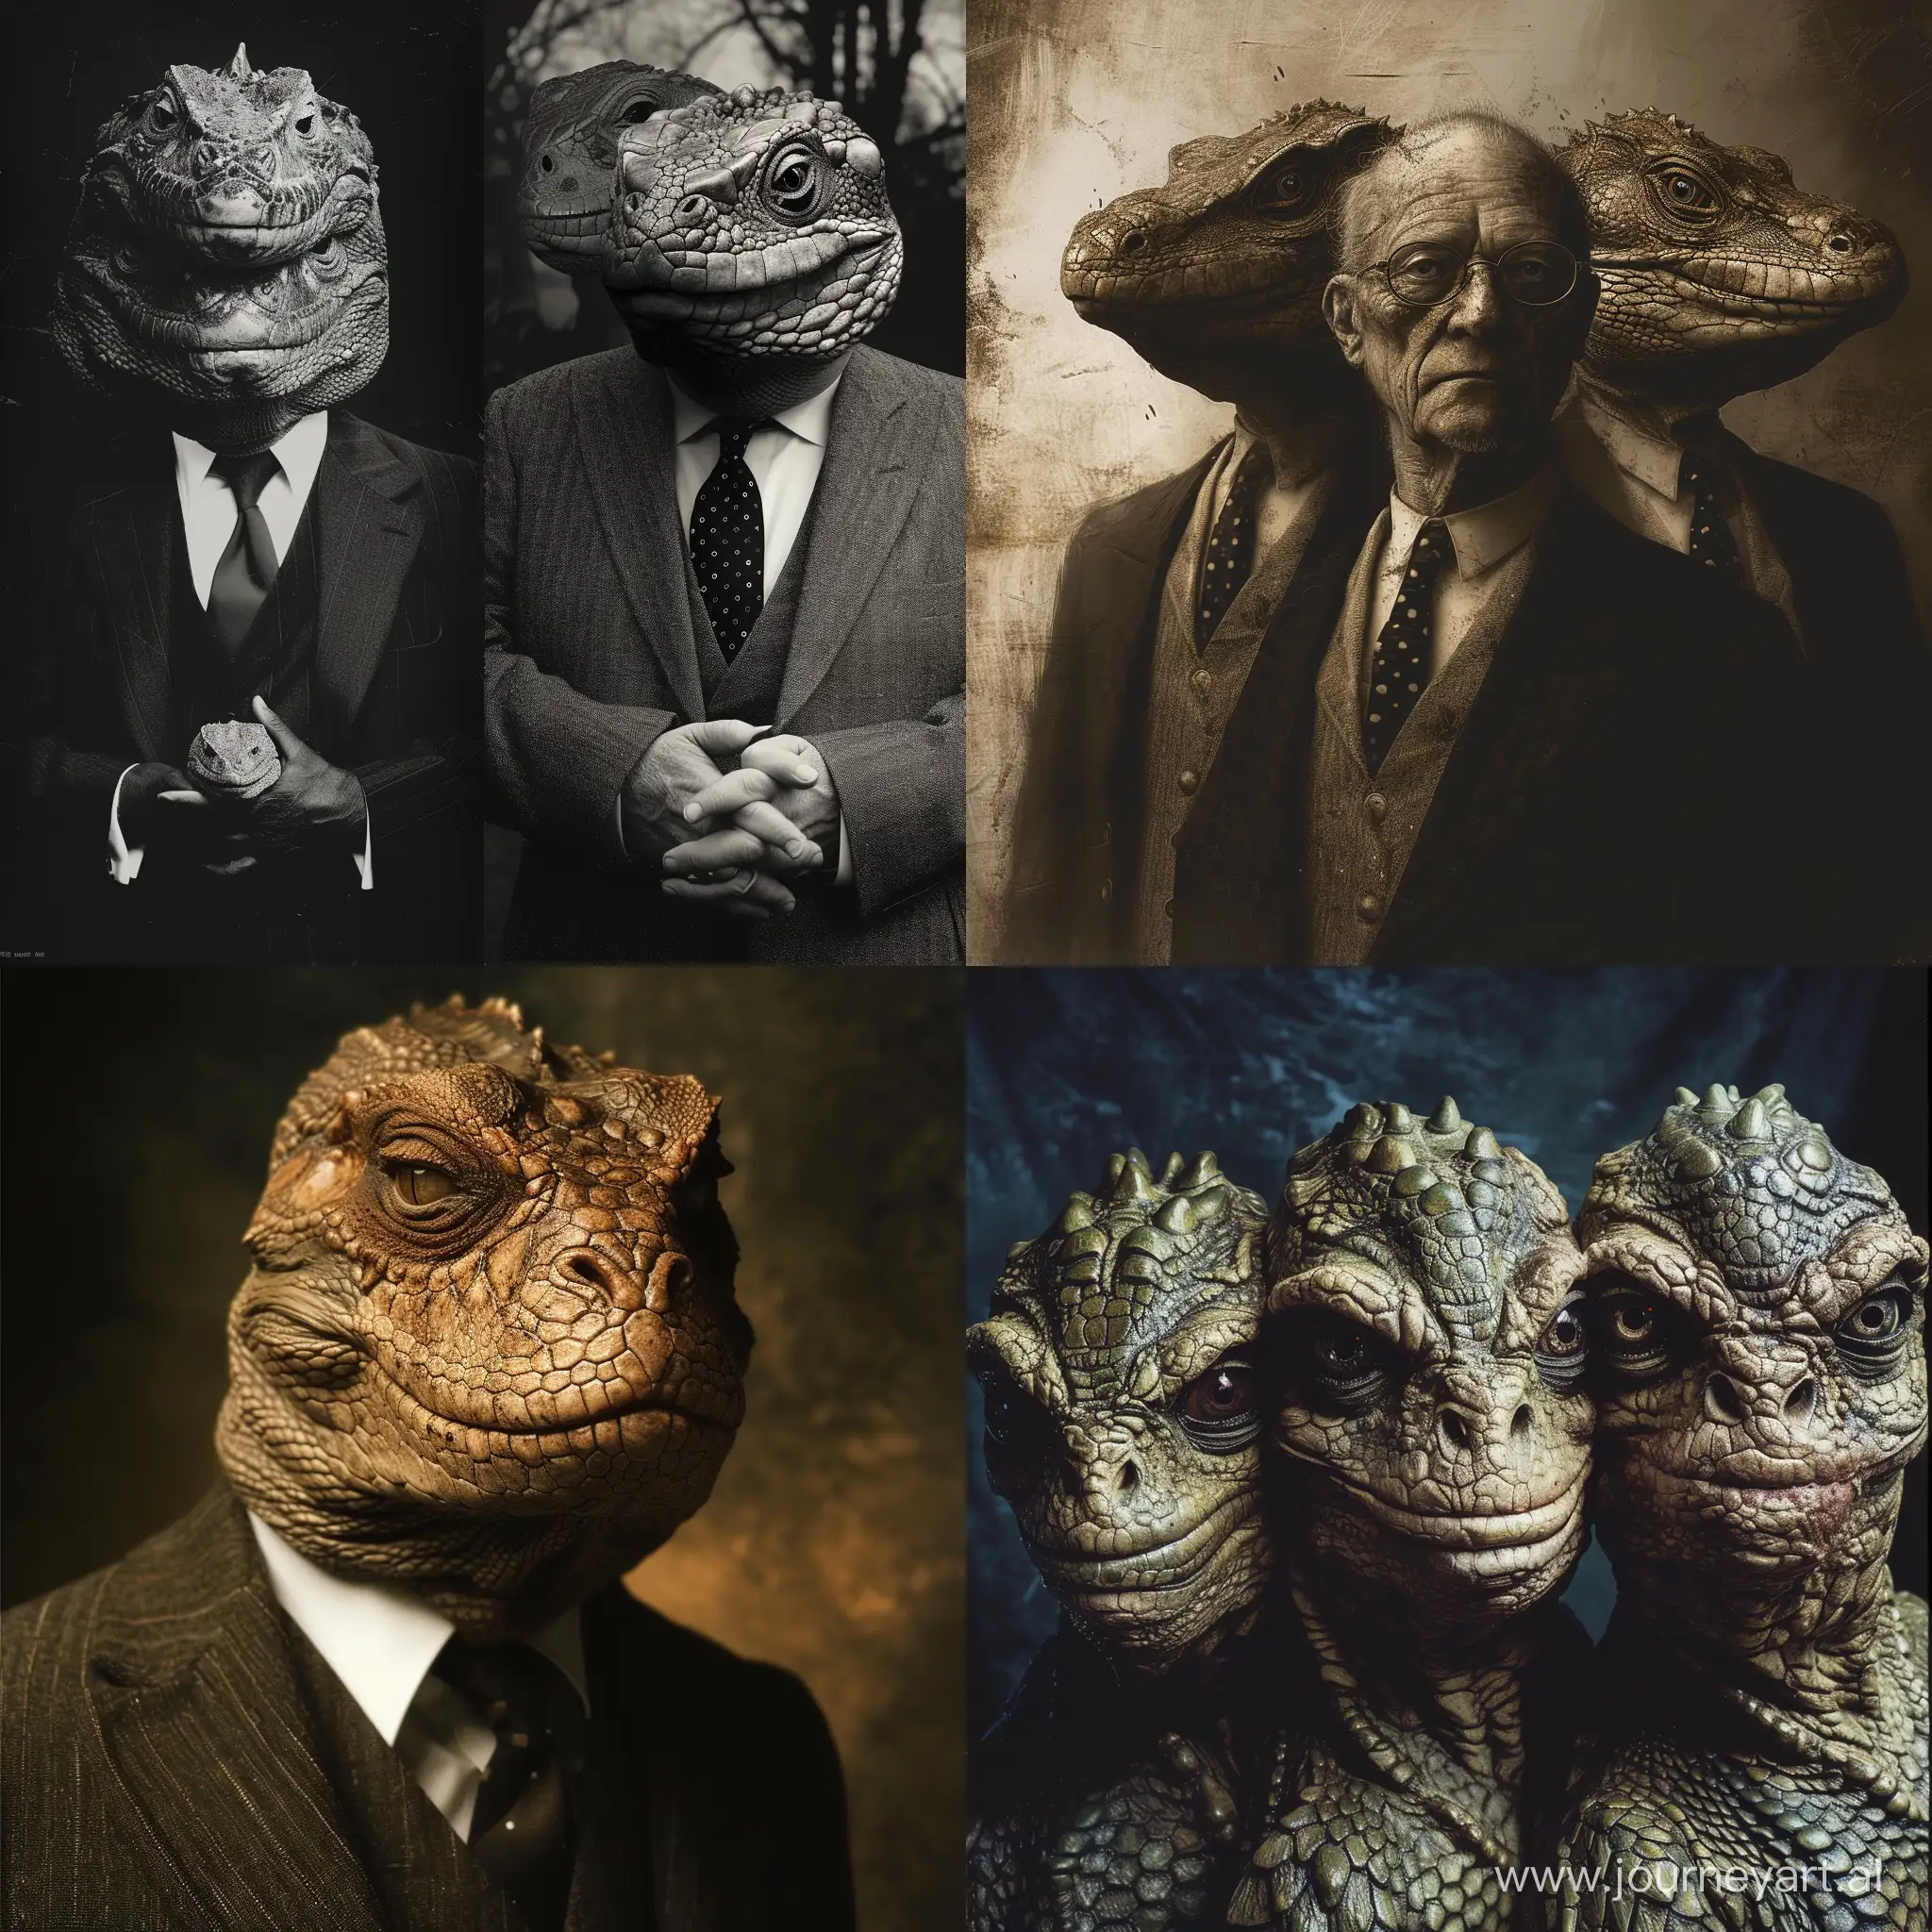 Famous Influencial figures who are also hideous reptilian people in secret